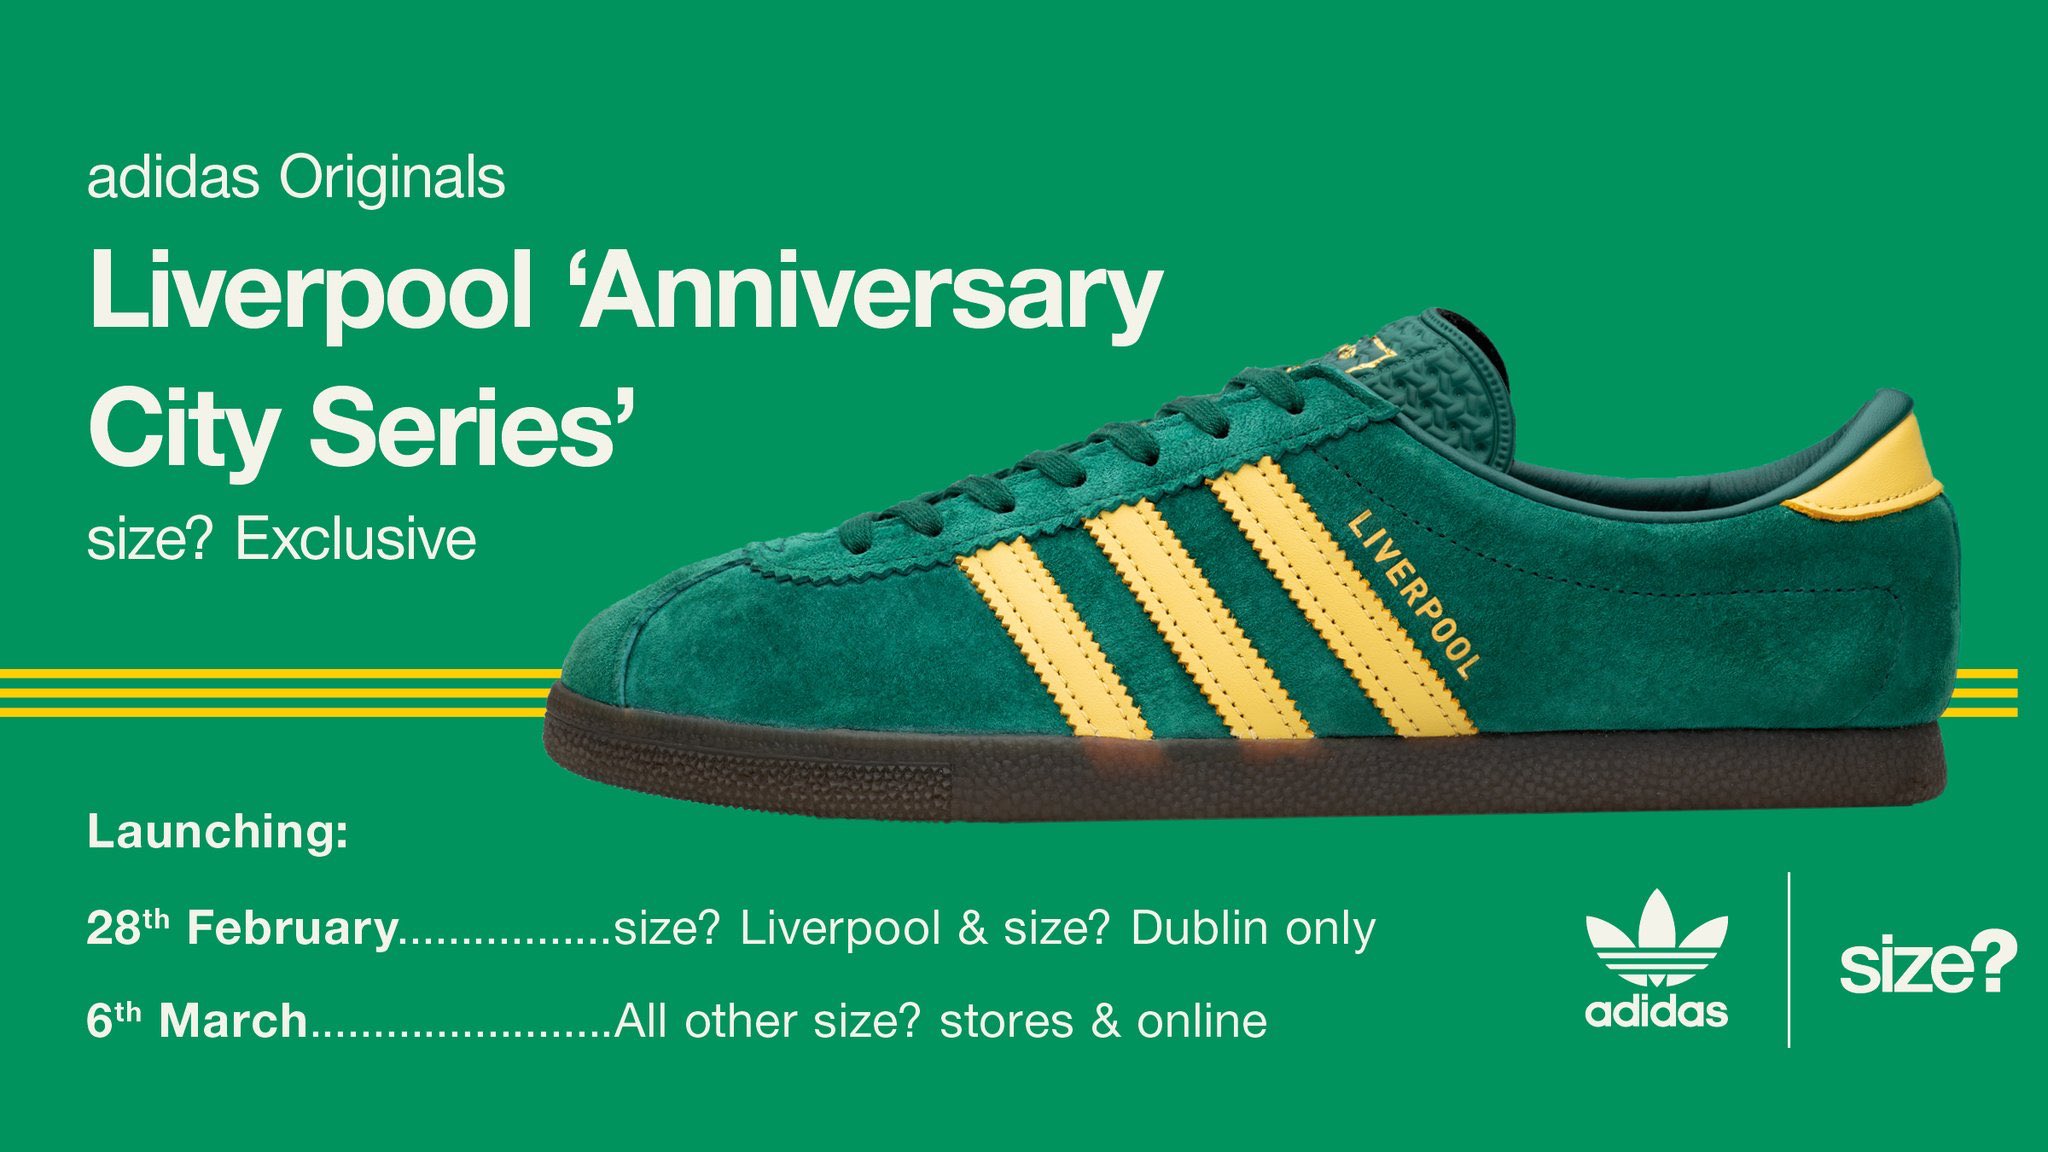 Man on "📢Just Announced - Adidas Liverpool Release Info 28th Feb - Liverpool and Dublin stores. 6th March - All other Size stores and online. #adidasliverpool https://t.co/uqK89e5Iqz" / Twitter